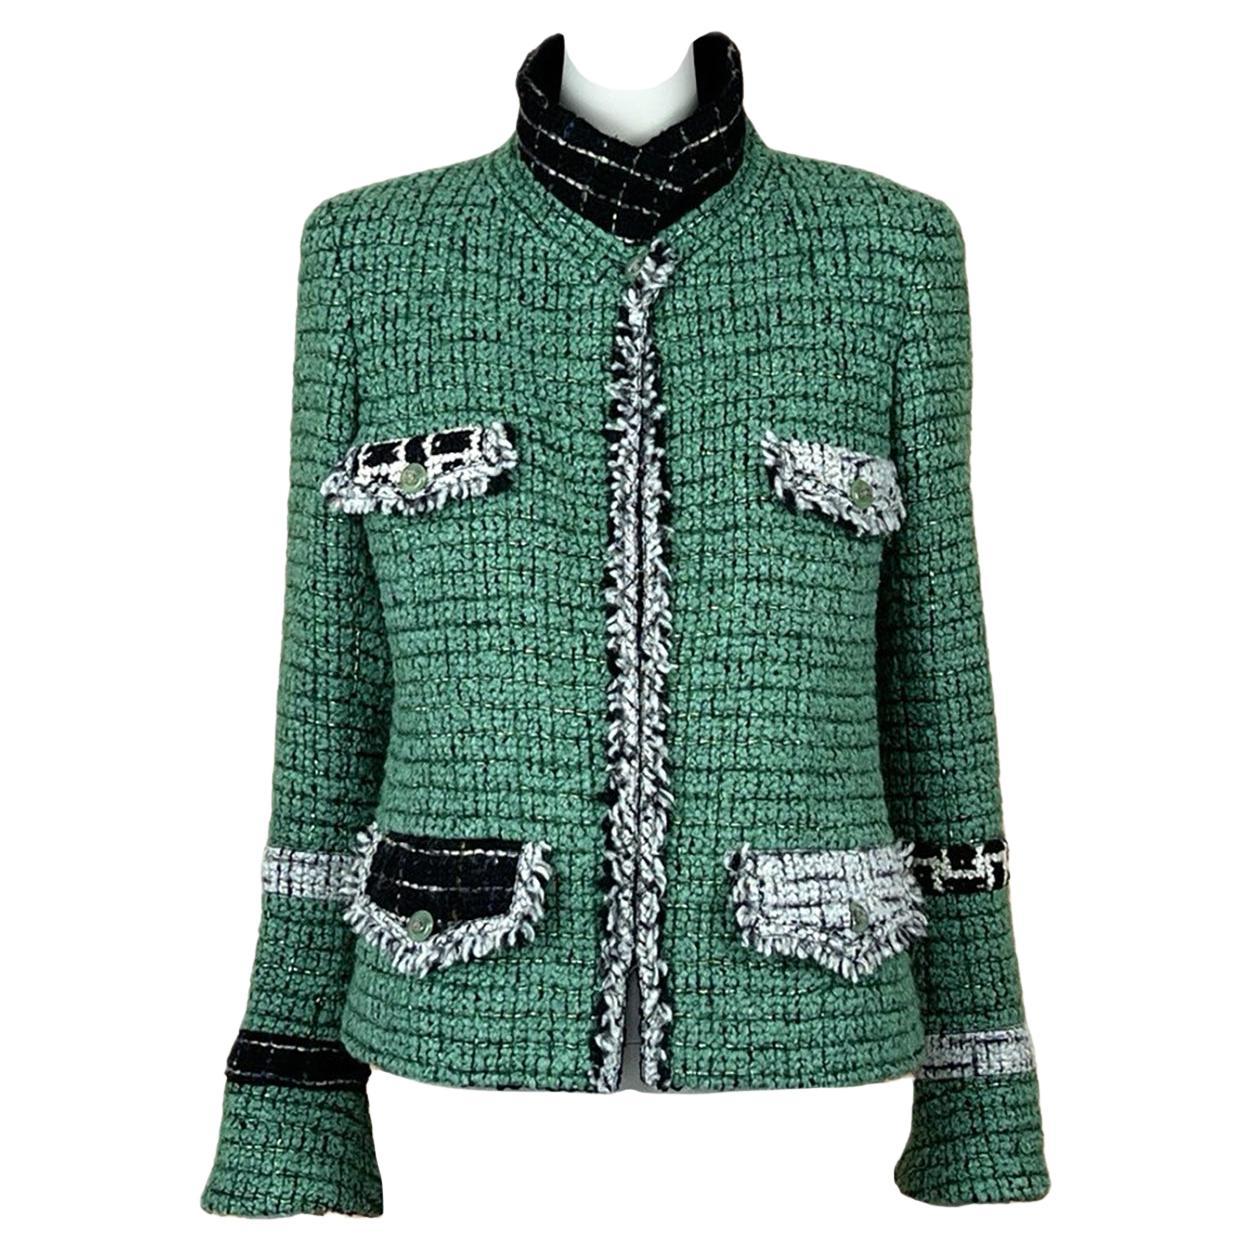 Chanel Extremely Rare Emerald Green Lesage Tweed Jacket